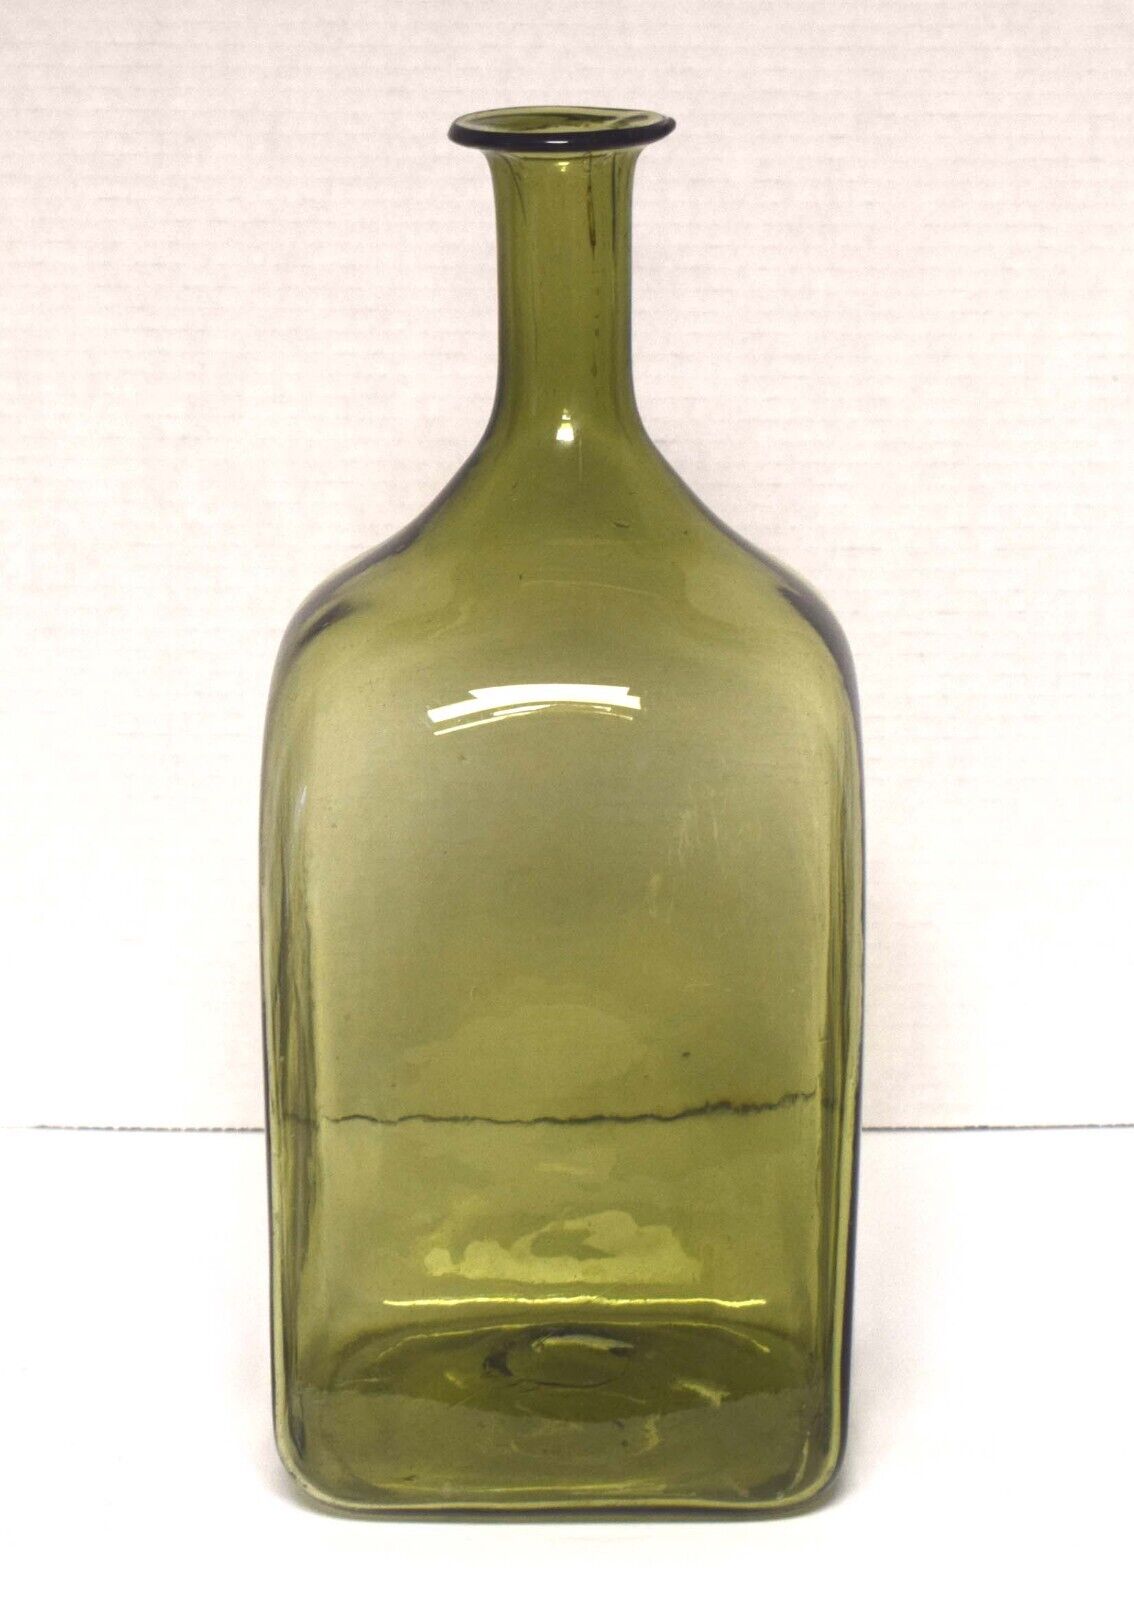 EXCEPTIONAL LATE 18th CENTURY LARGE GERMAN STORAGE BOTTLE